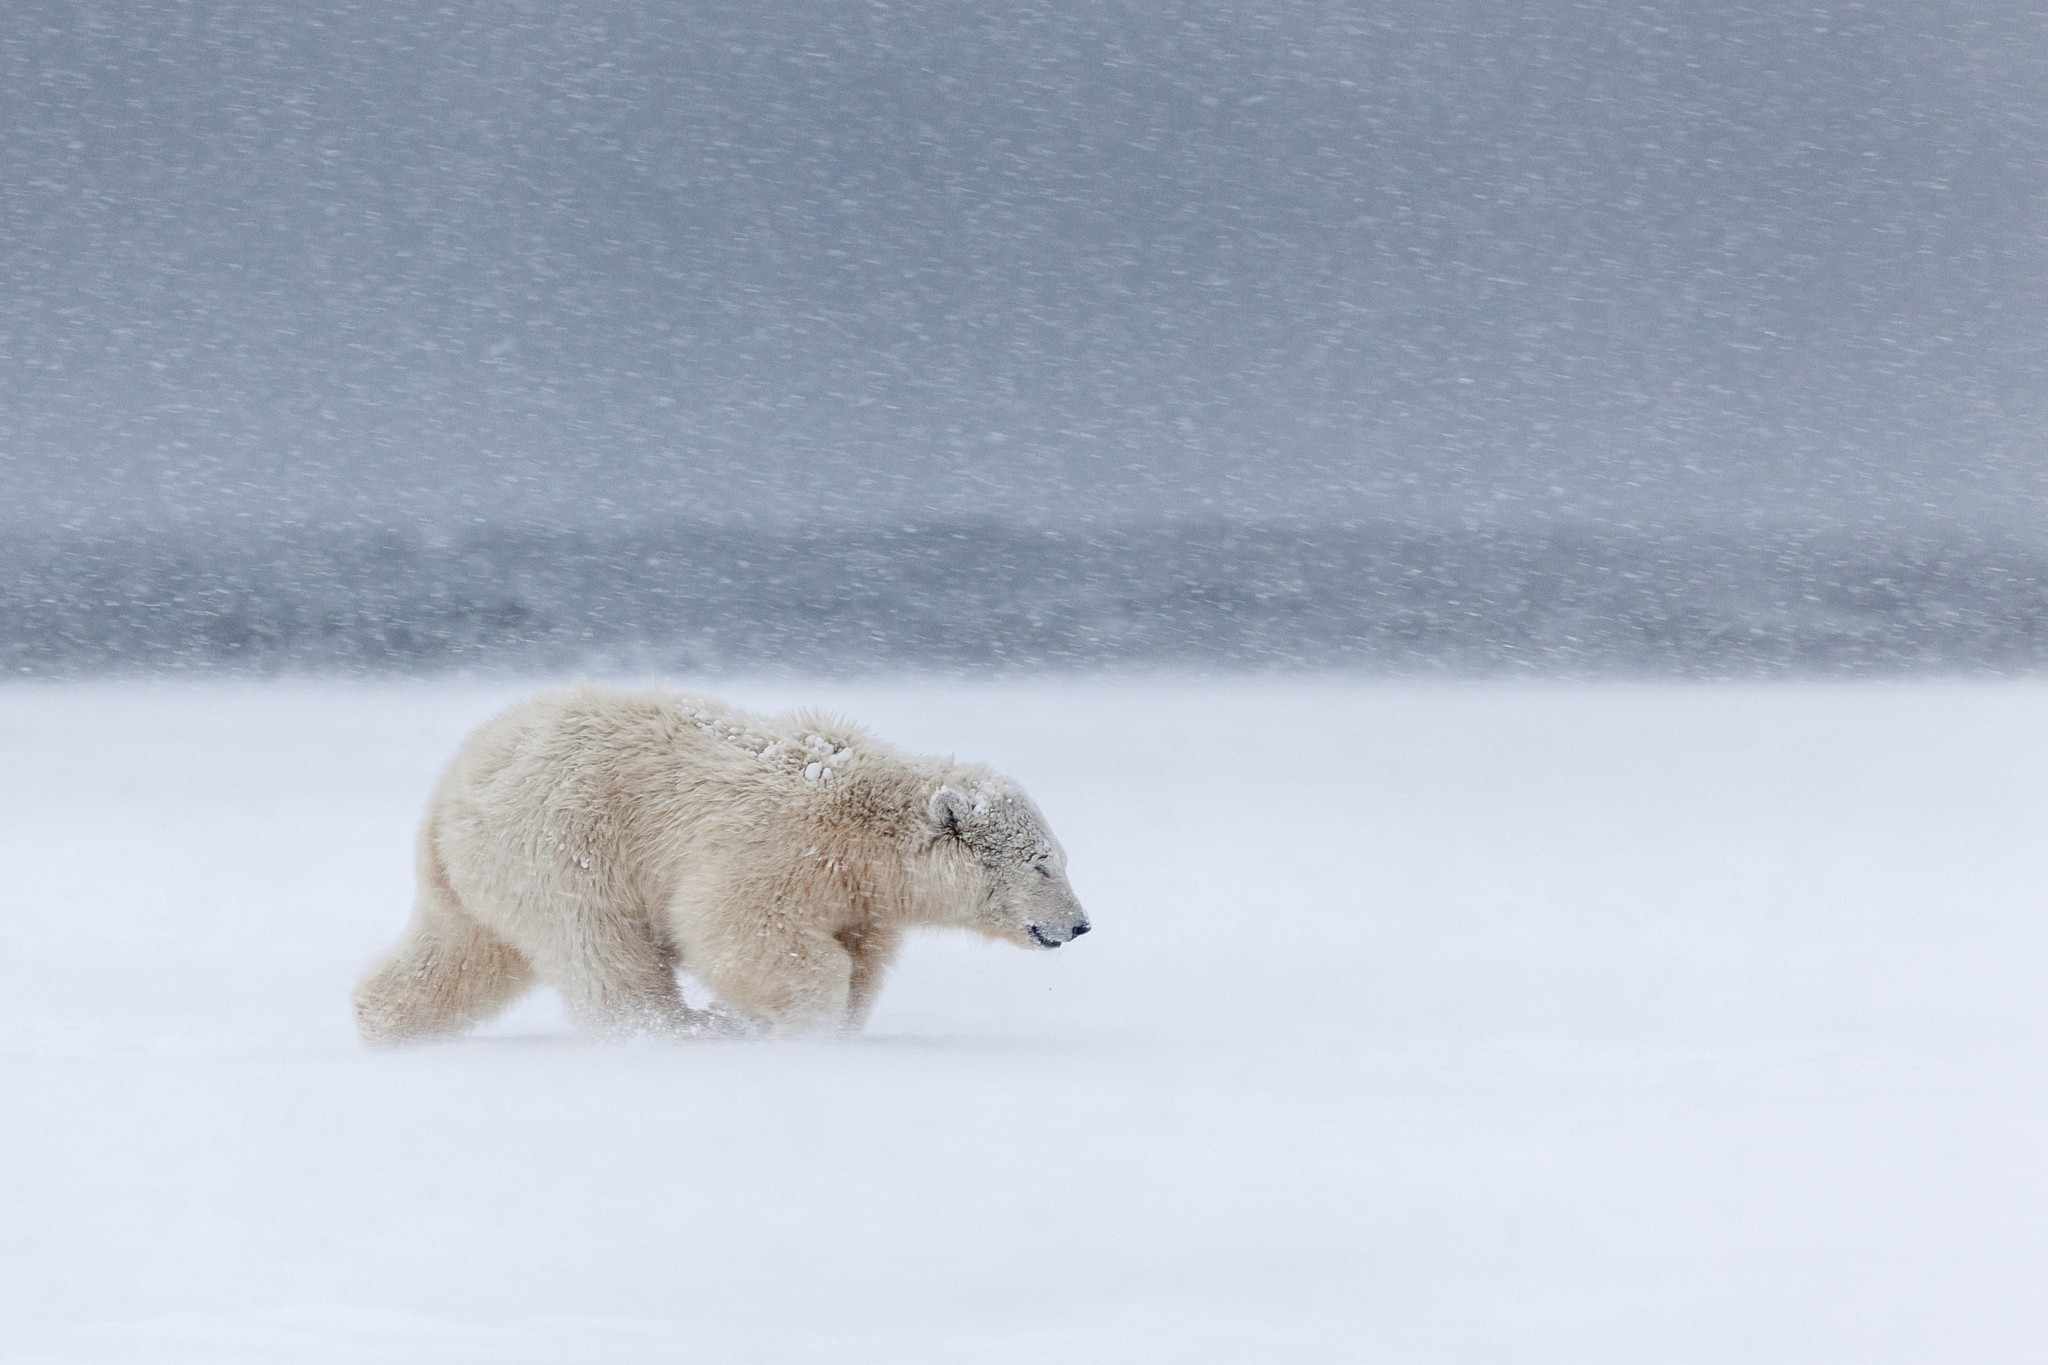 General 2048x1365 animals polar bears snow mammals white snowing winter snowstorm bears cold outdoors